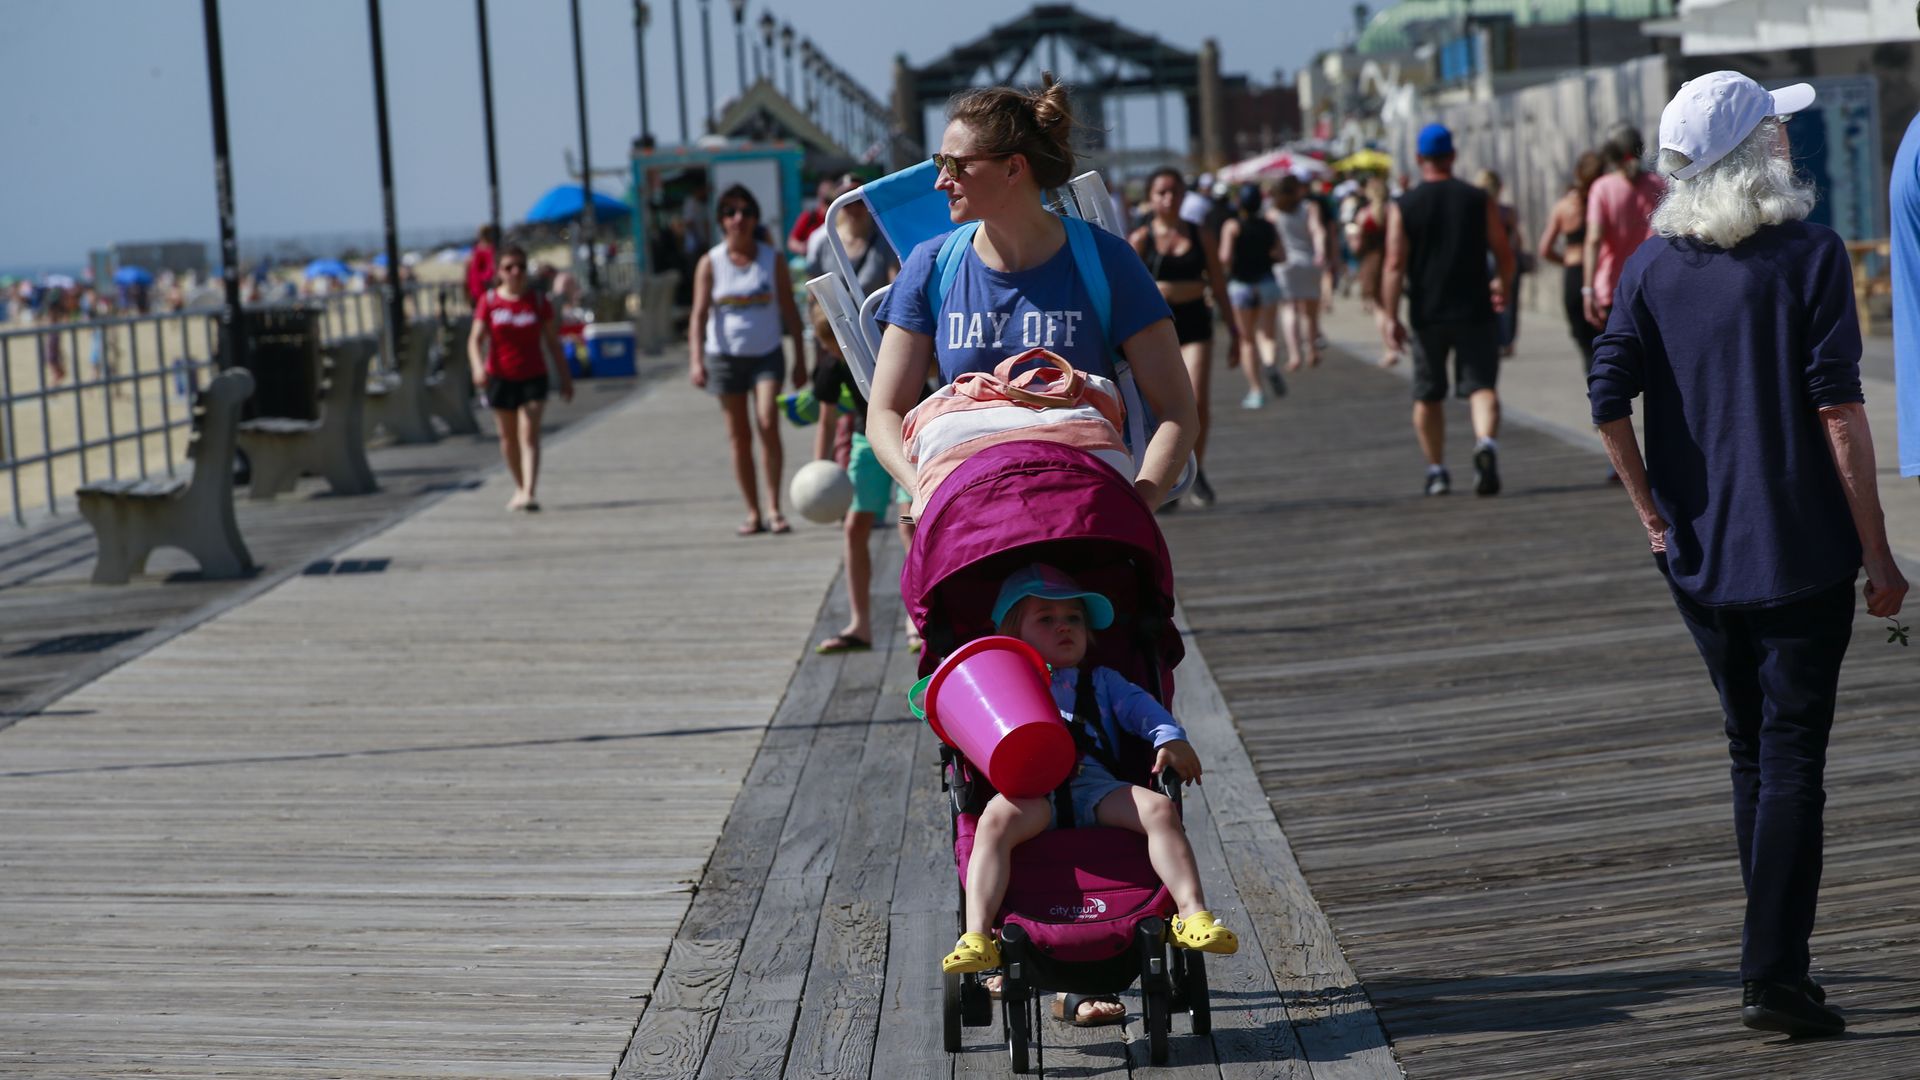 Visitors to a New Jersey boardwalk on Memorial Day, 2019. Photo: Kena Betancur/Getty Images